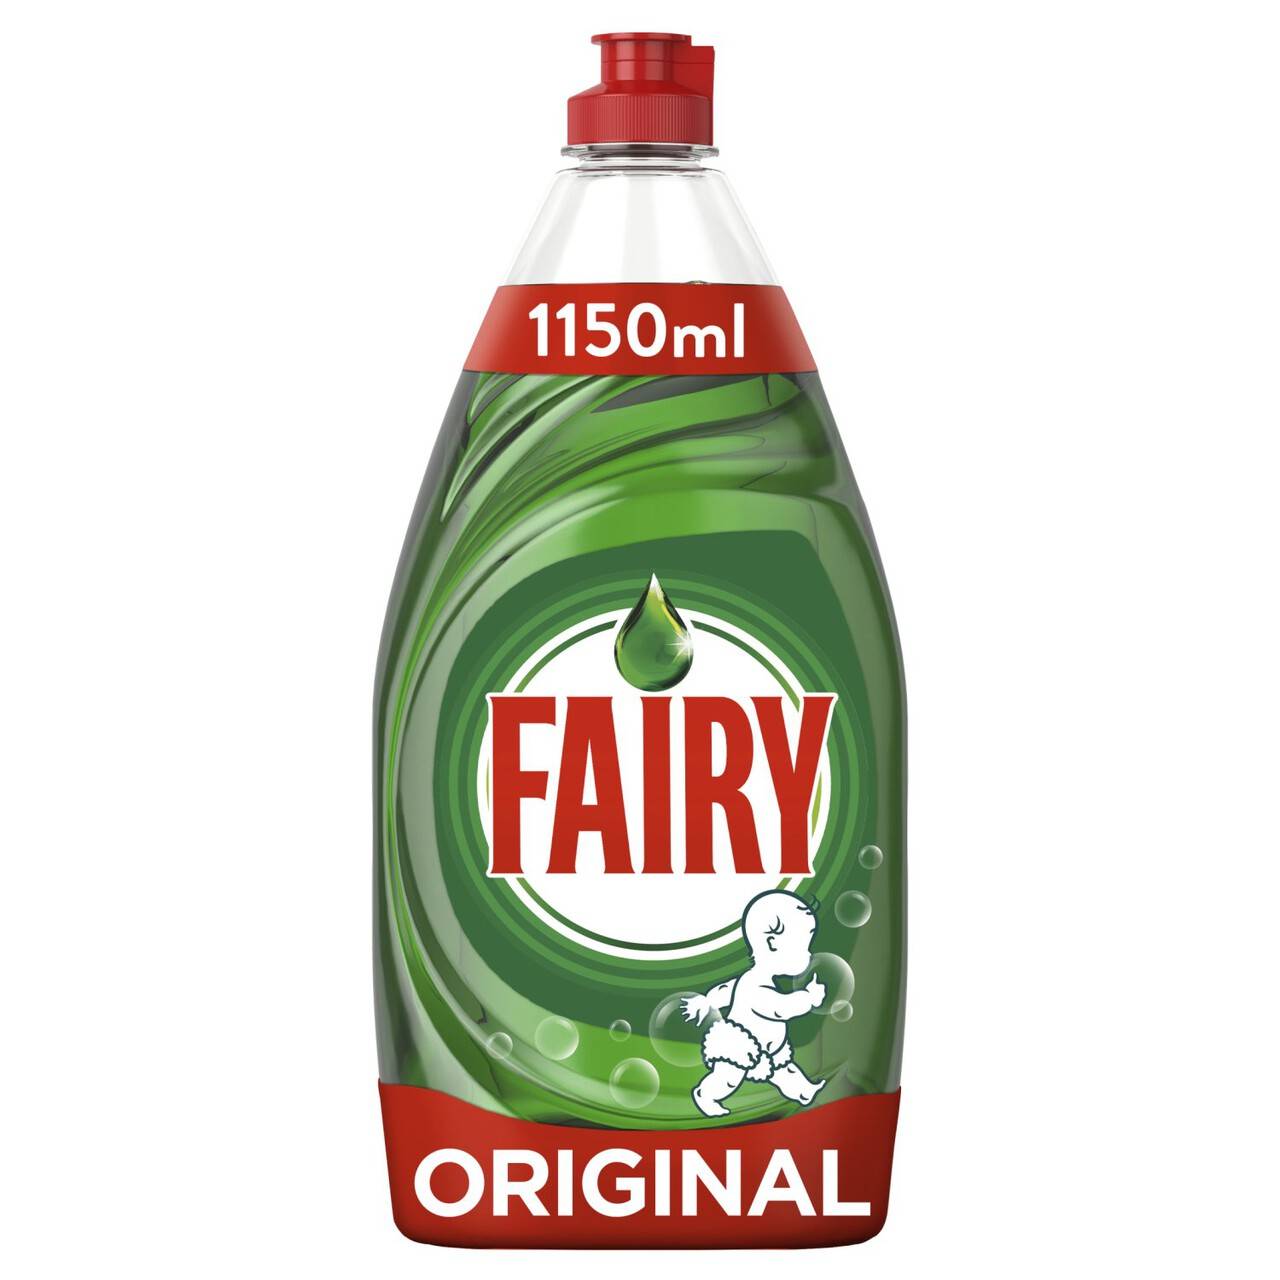 Fairy Original Washing Up Liquid Green with LiftAction